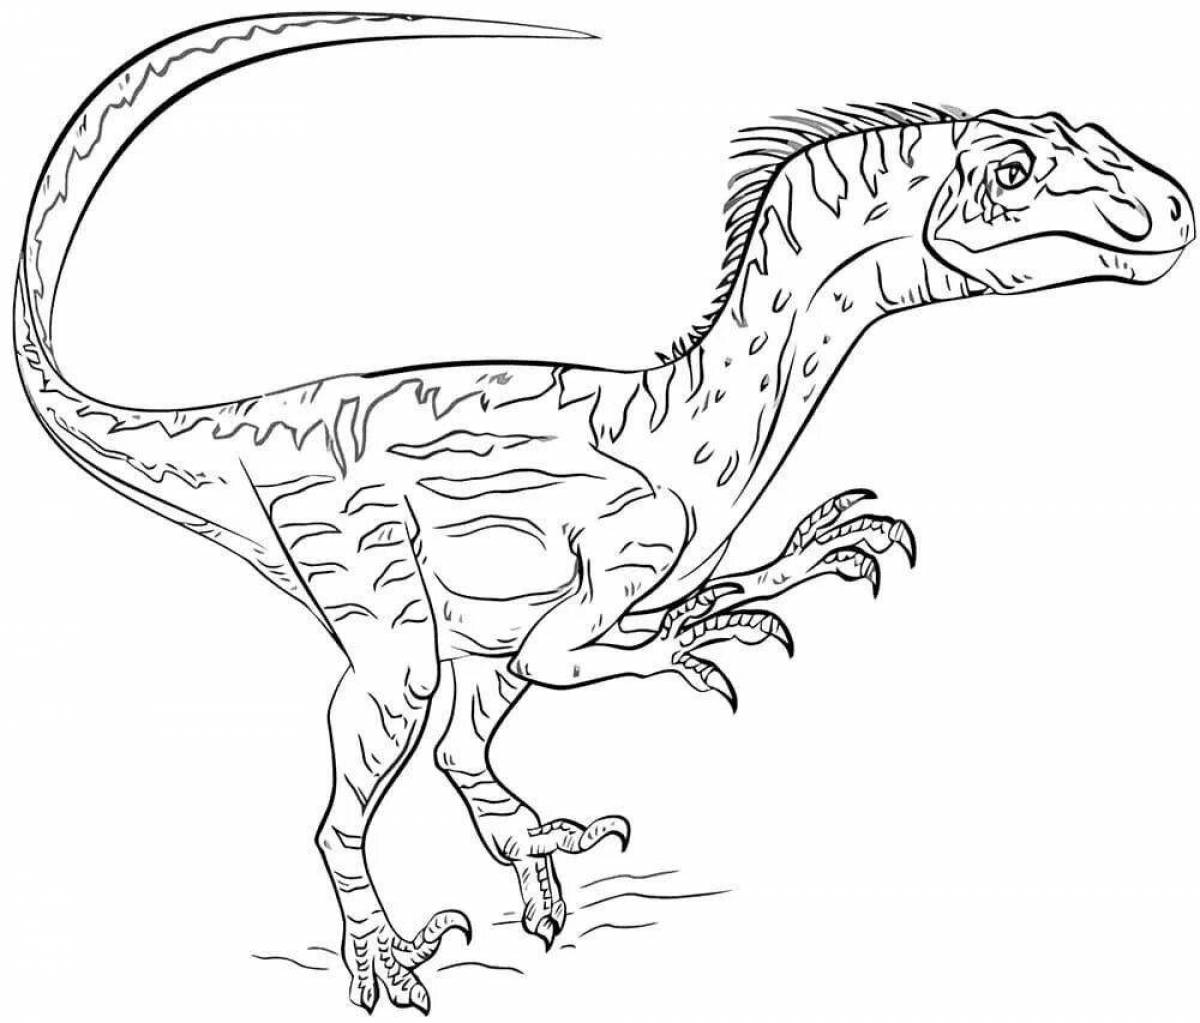 A beautifully colored Velociraptor coloring page from Jurassic World